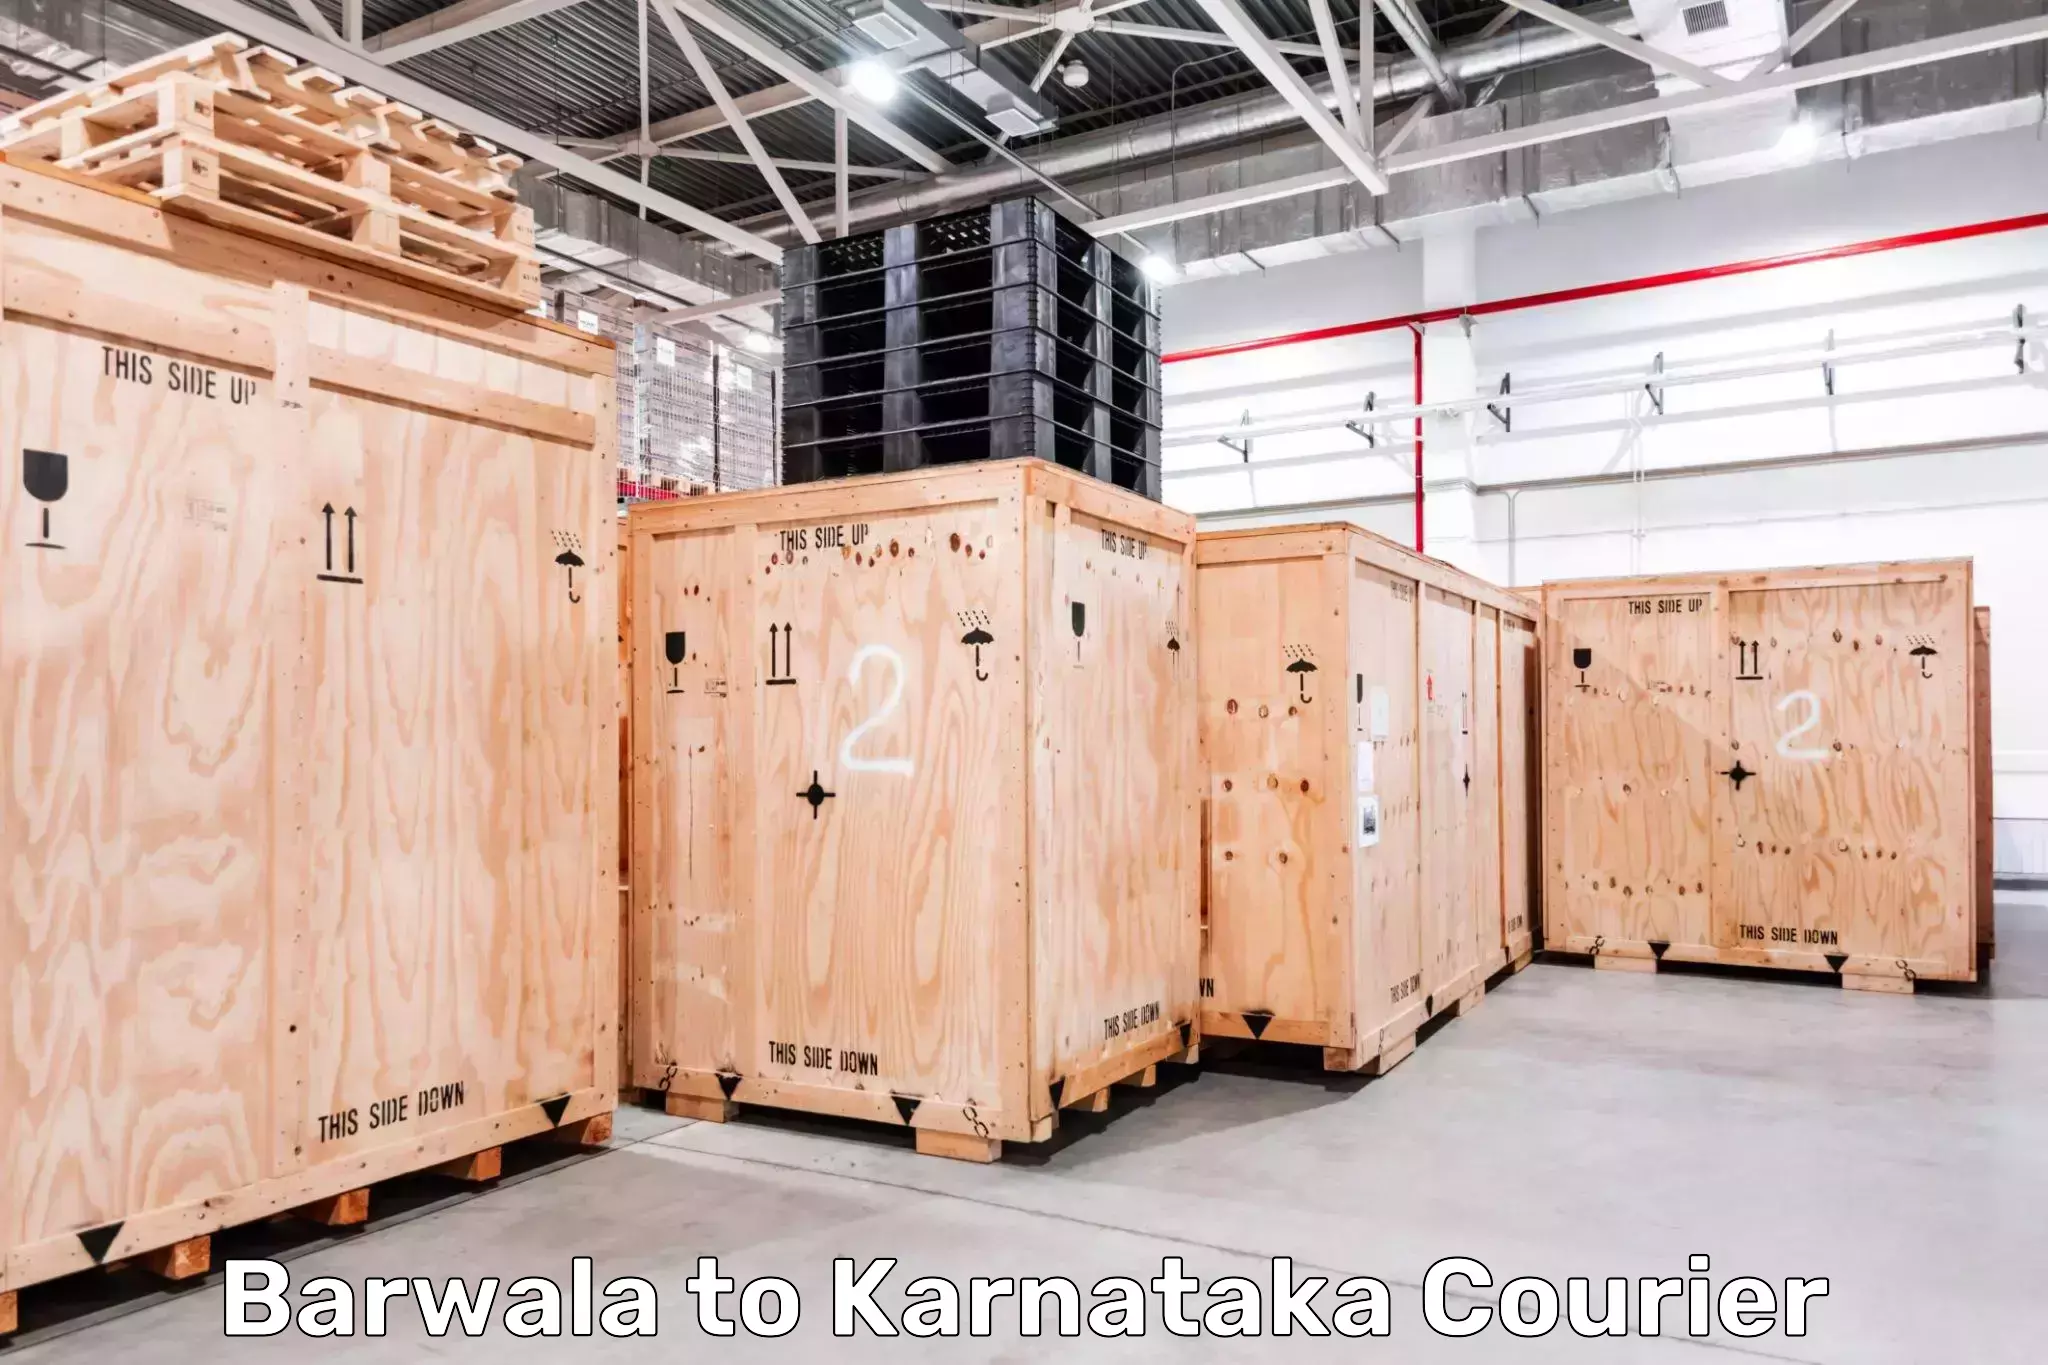 Global courier networks Barwala to Hospet